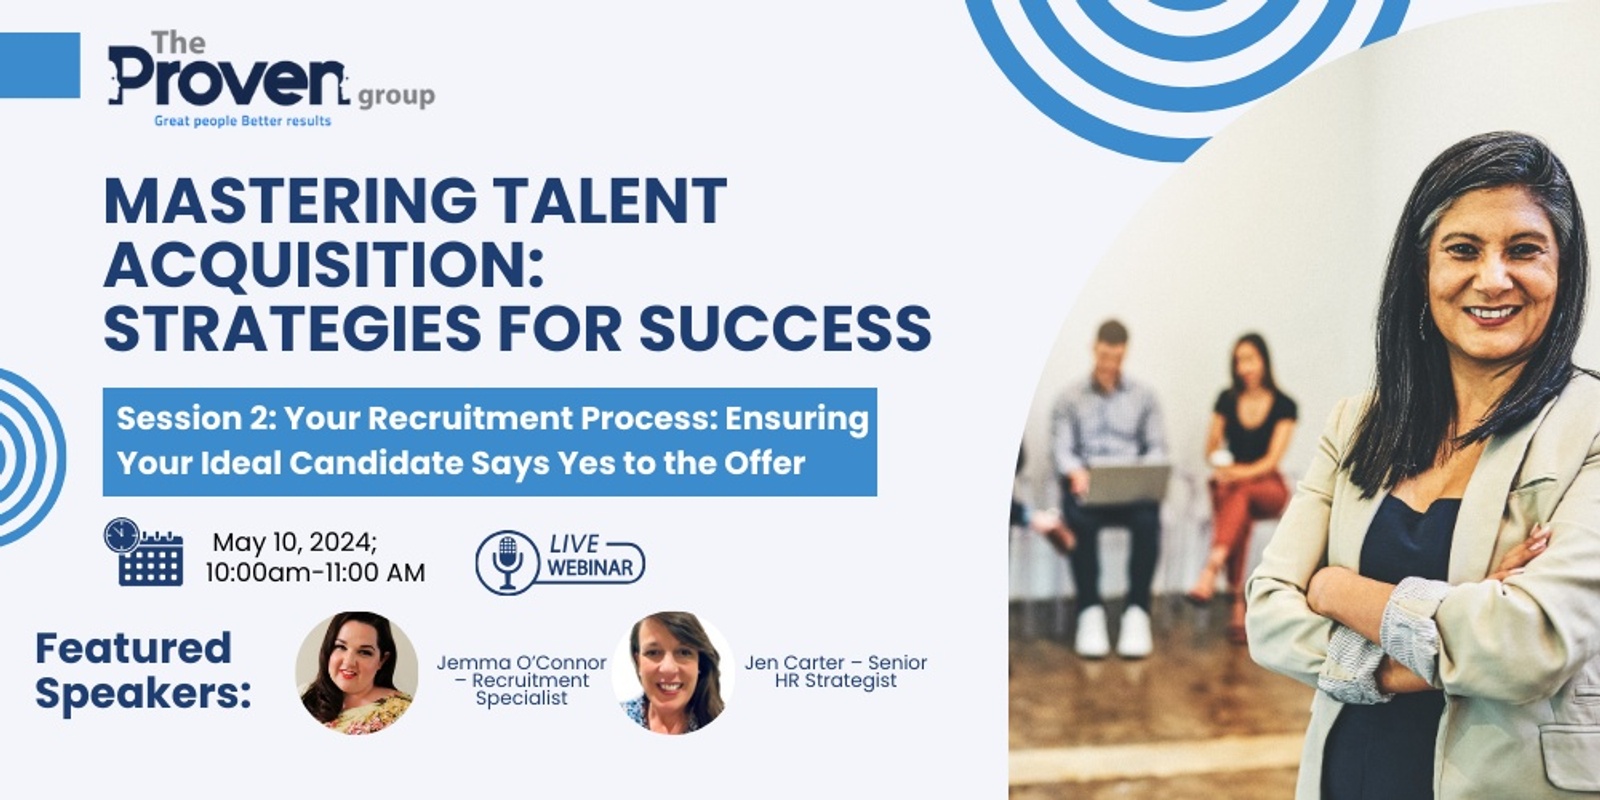 Banner image for Mastering Talent Acquisition: Strategies for Success - Session 2 Your Recruitment Process: Ensuring Your Ideal Candidate Says Yes to the Offer